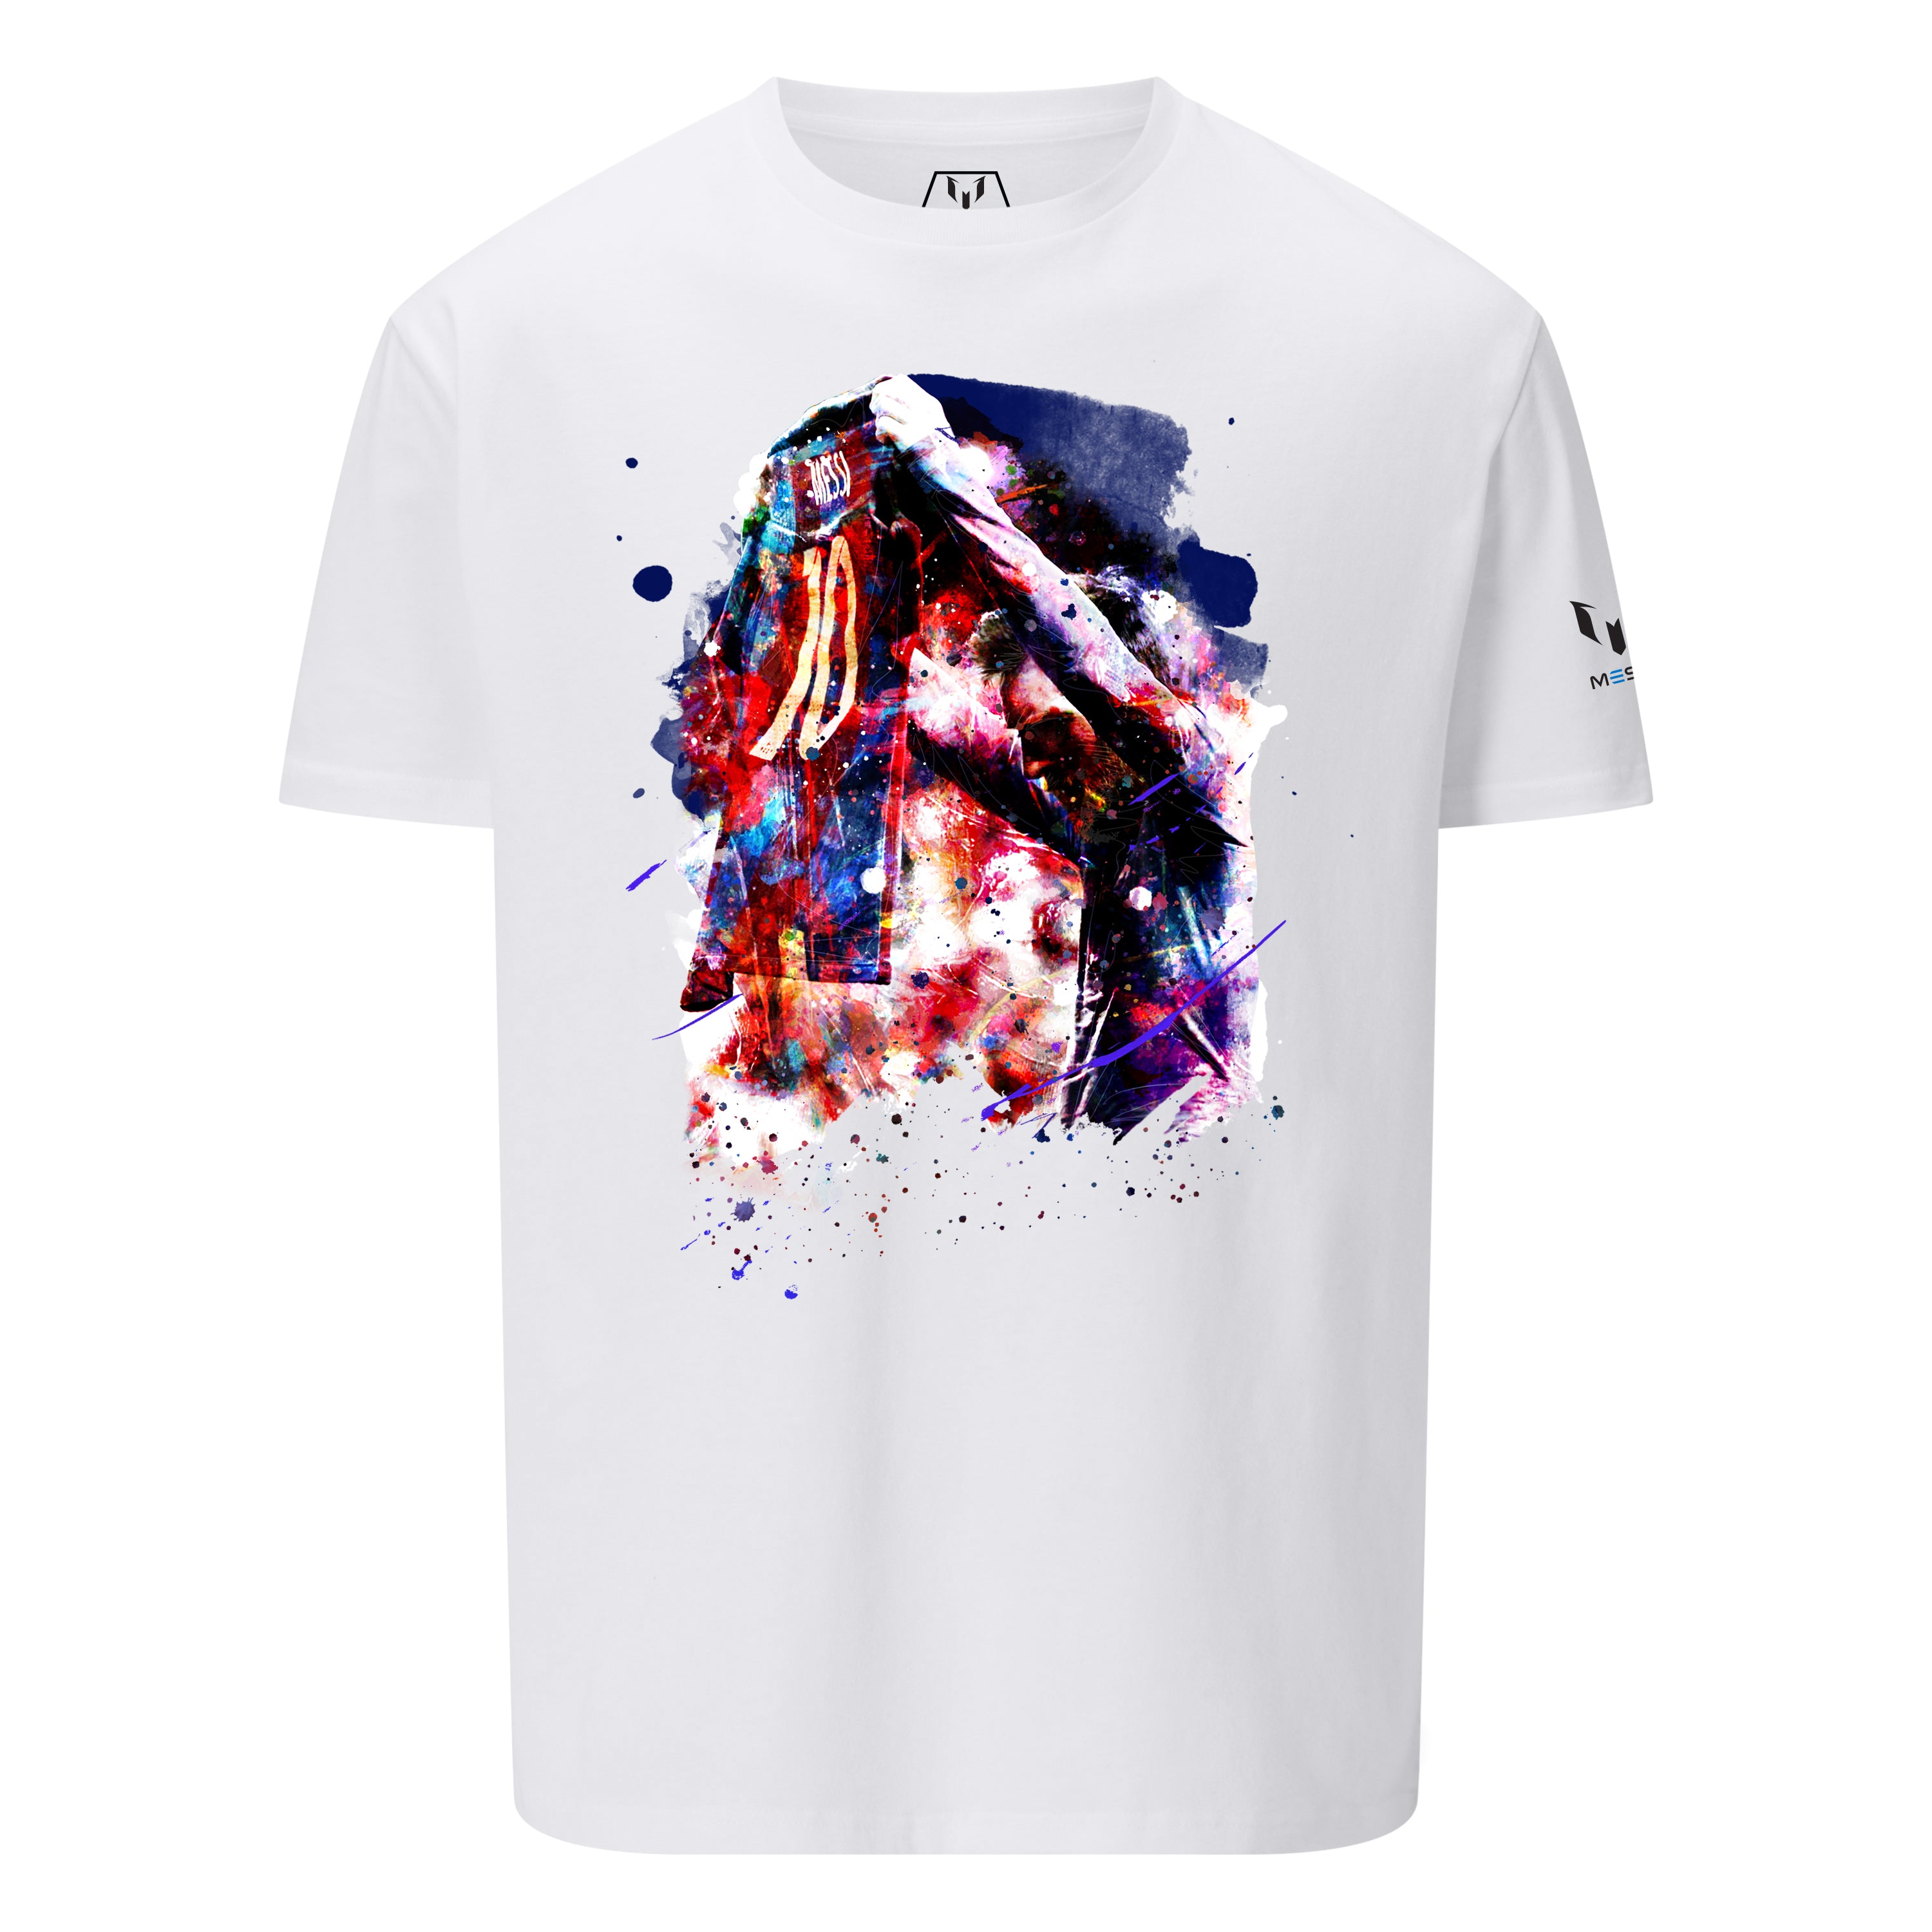 Shop Graphic T-Shirts at The Messi Messi Store | Store The